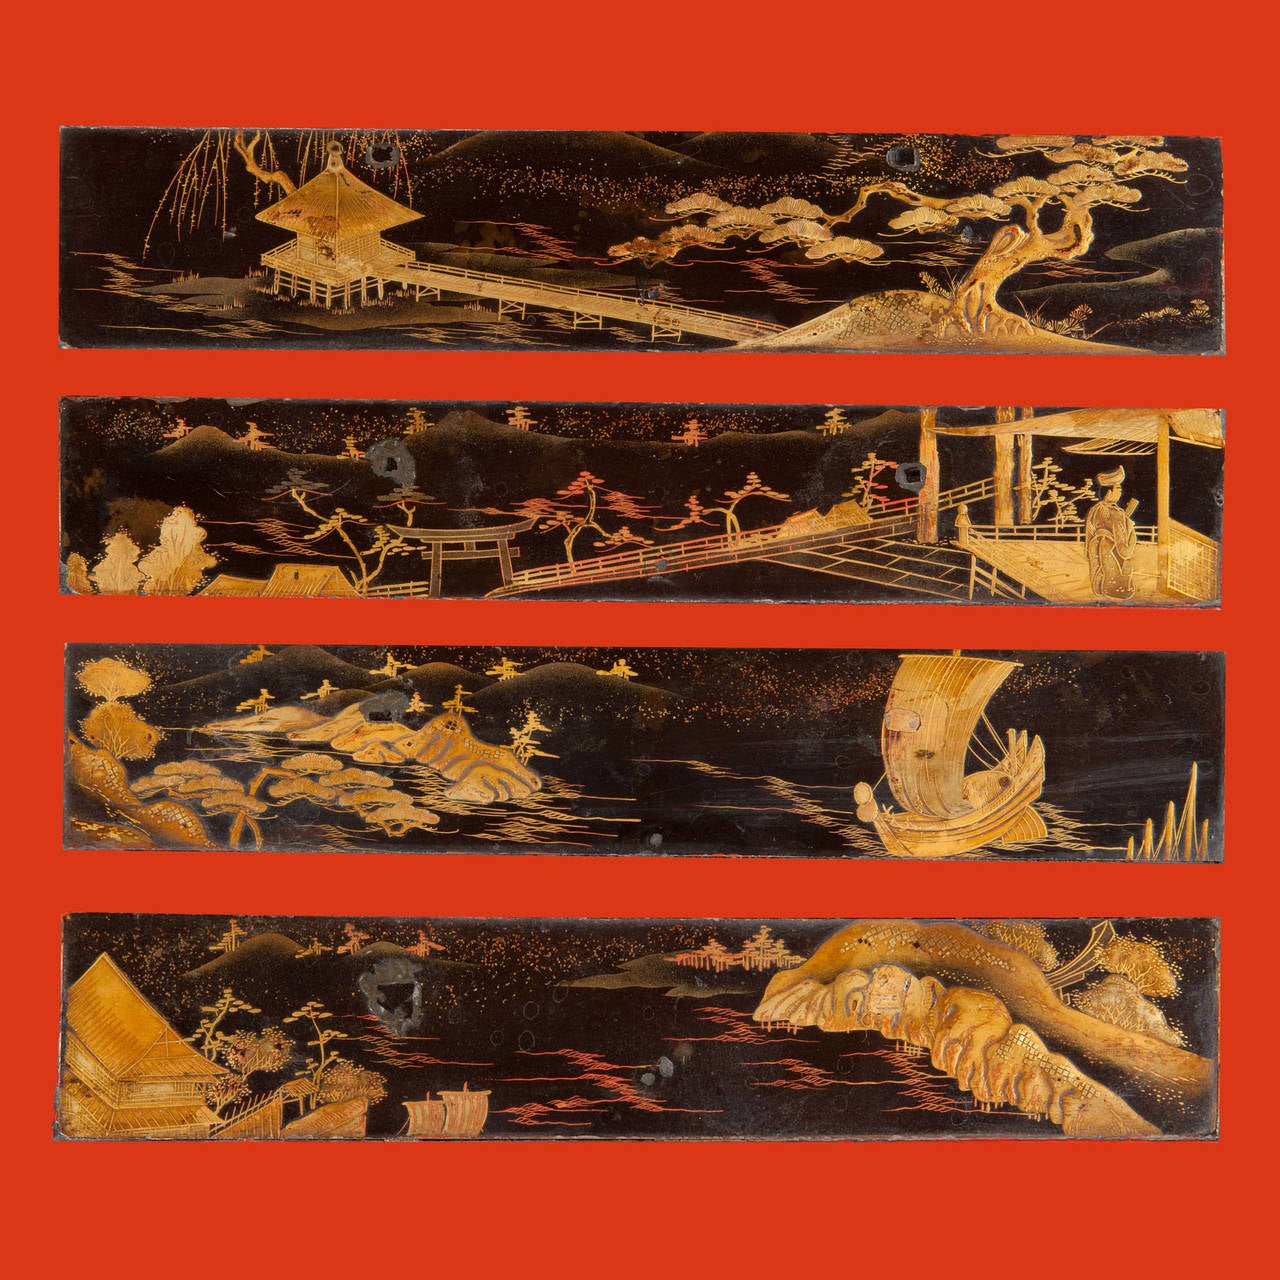 A mid-20th century red japanned occasional table, the square top with gilded centre and four Japanese lacquer panels, each depicting a landscape, set four shaped legs with bamboo turnings and joined by a central X-form stretcher. 

Since the 17th